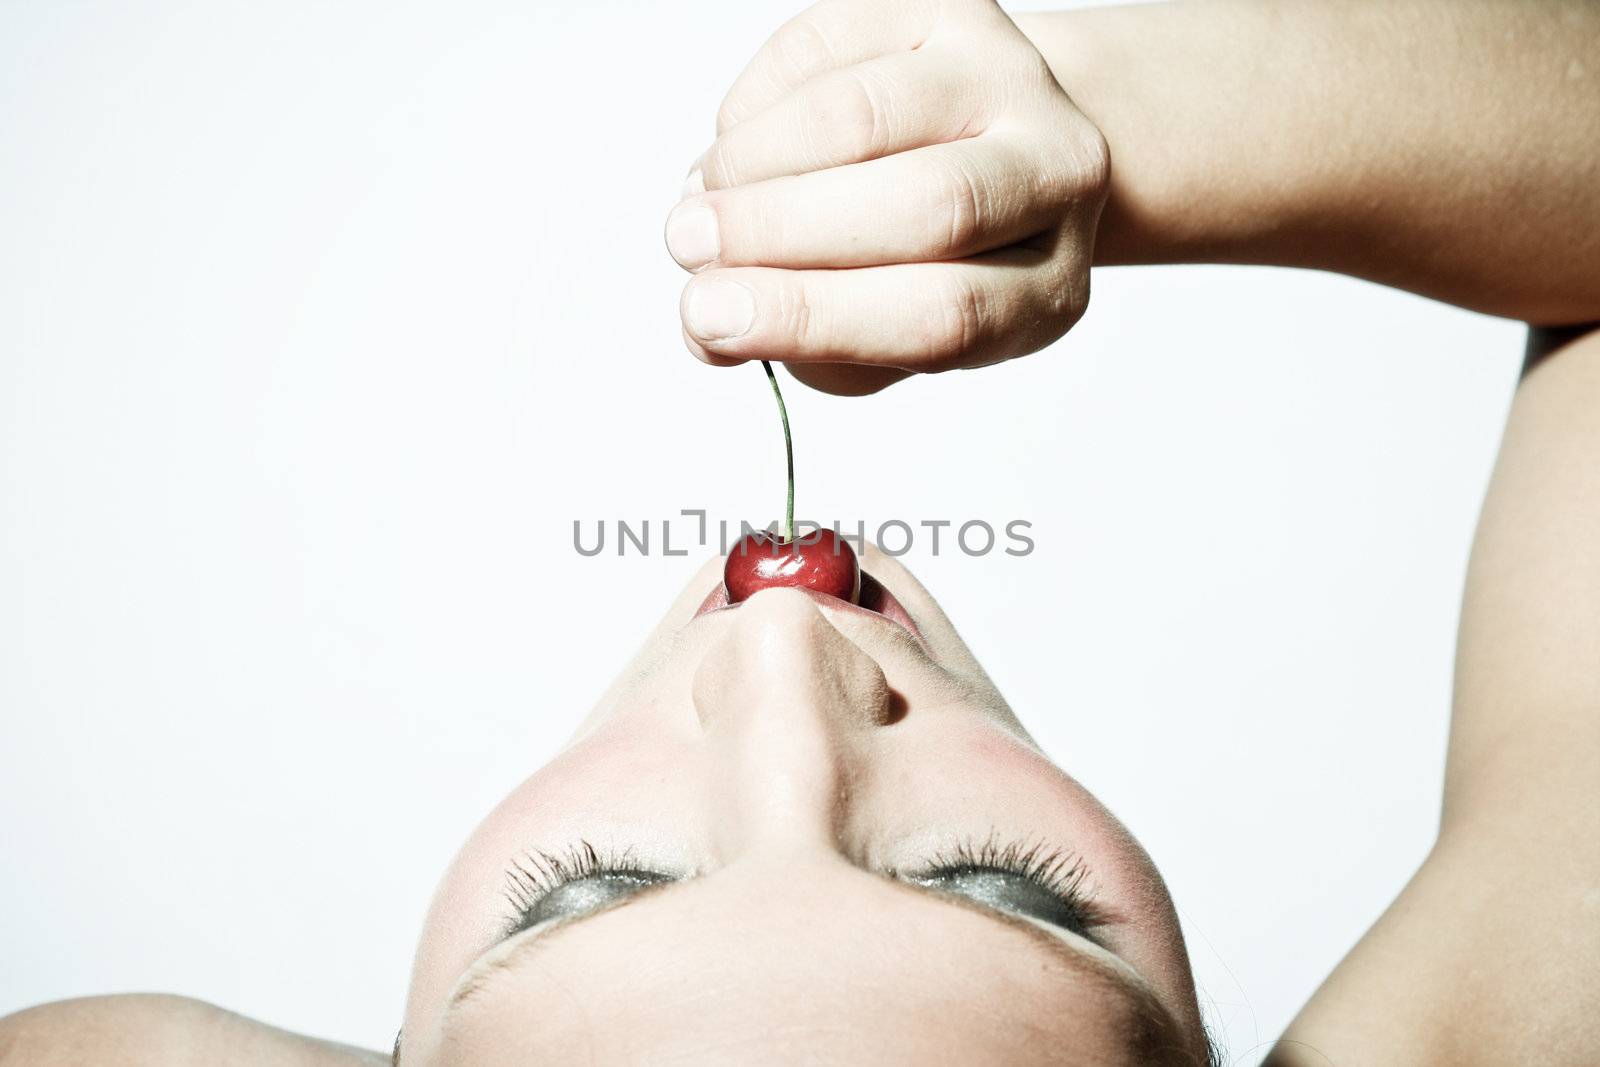 Woman Tasting A Cherry by nfx702